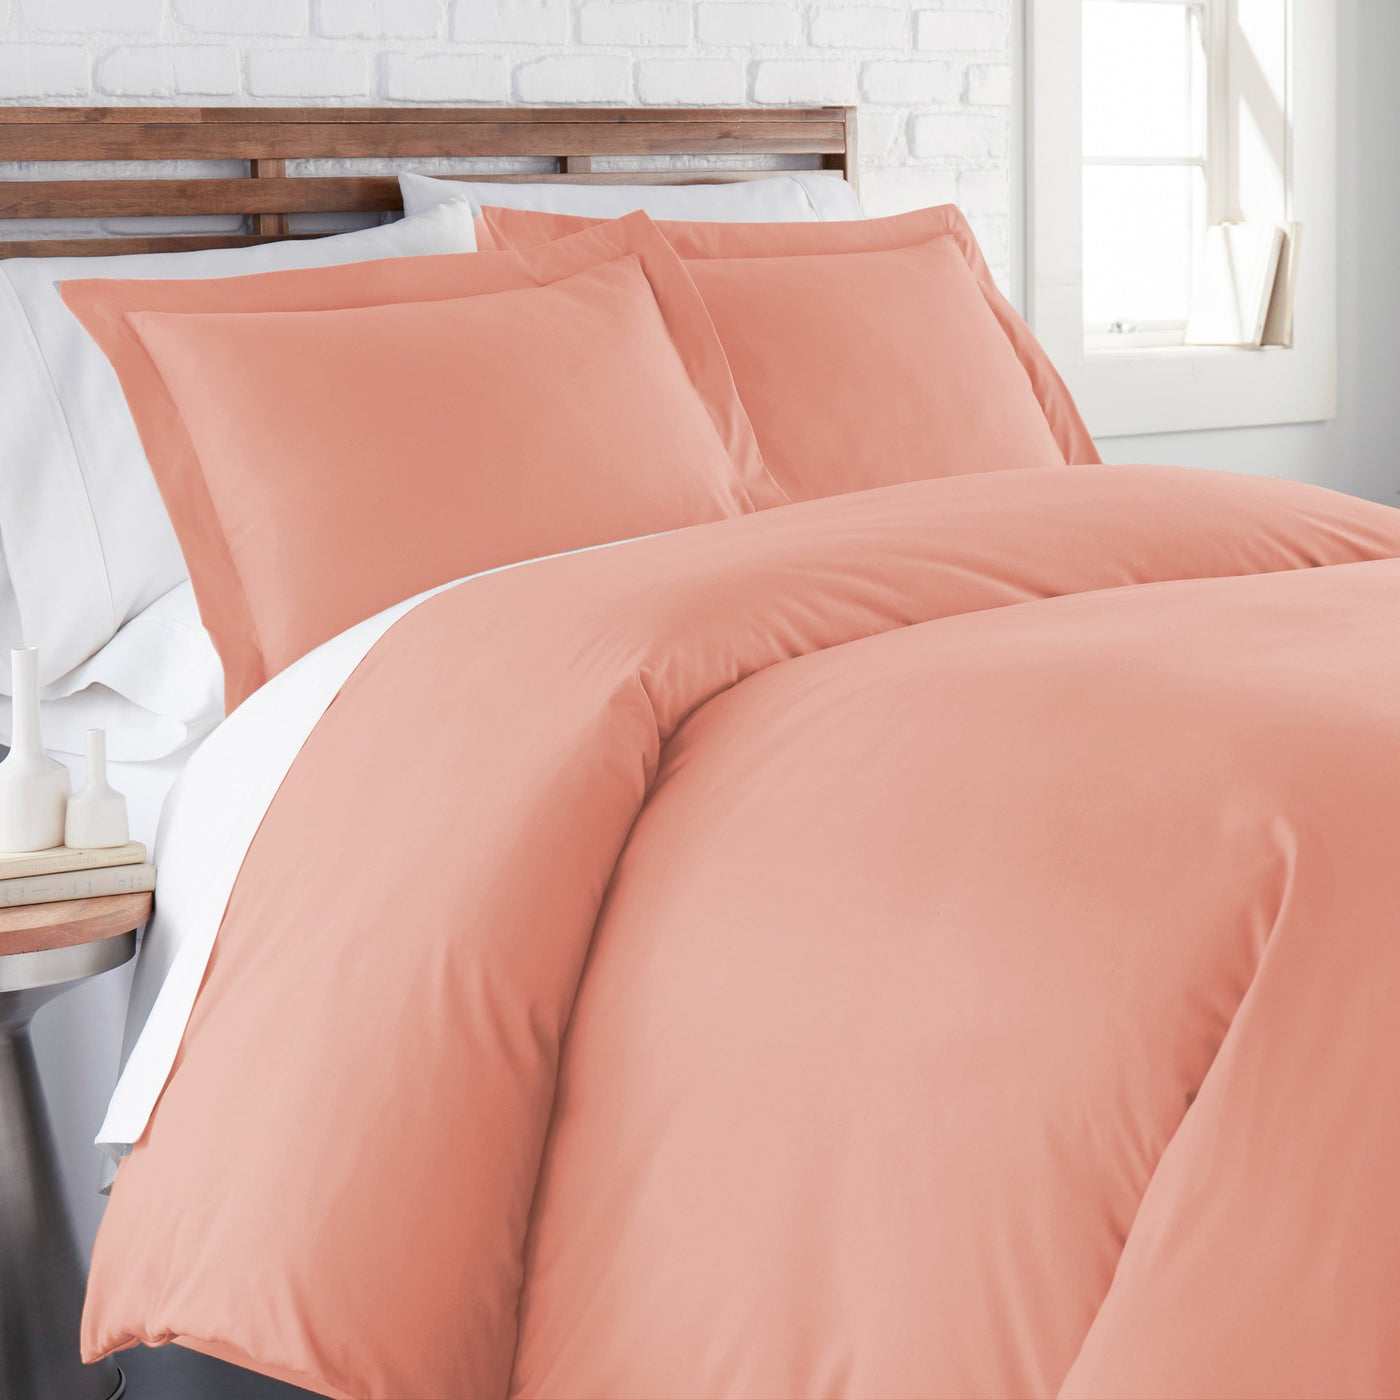 Side View of Everyday Essentials Duvet Cover Set in Peach#color_peach